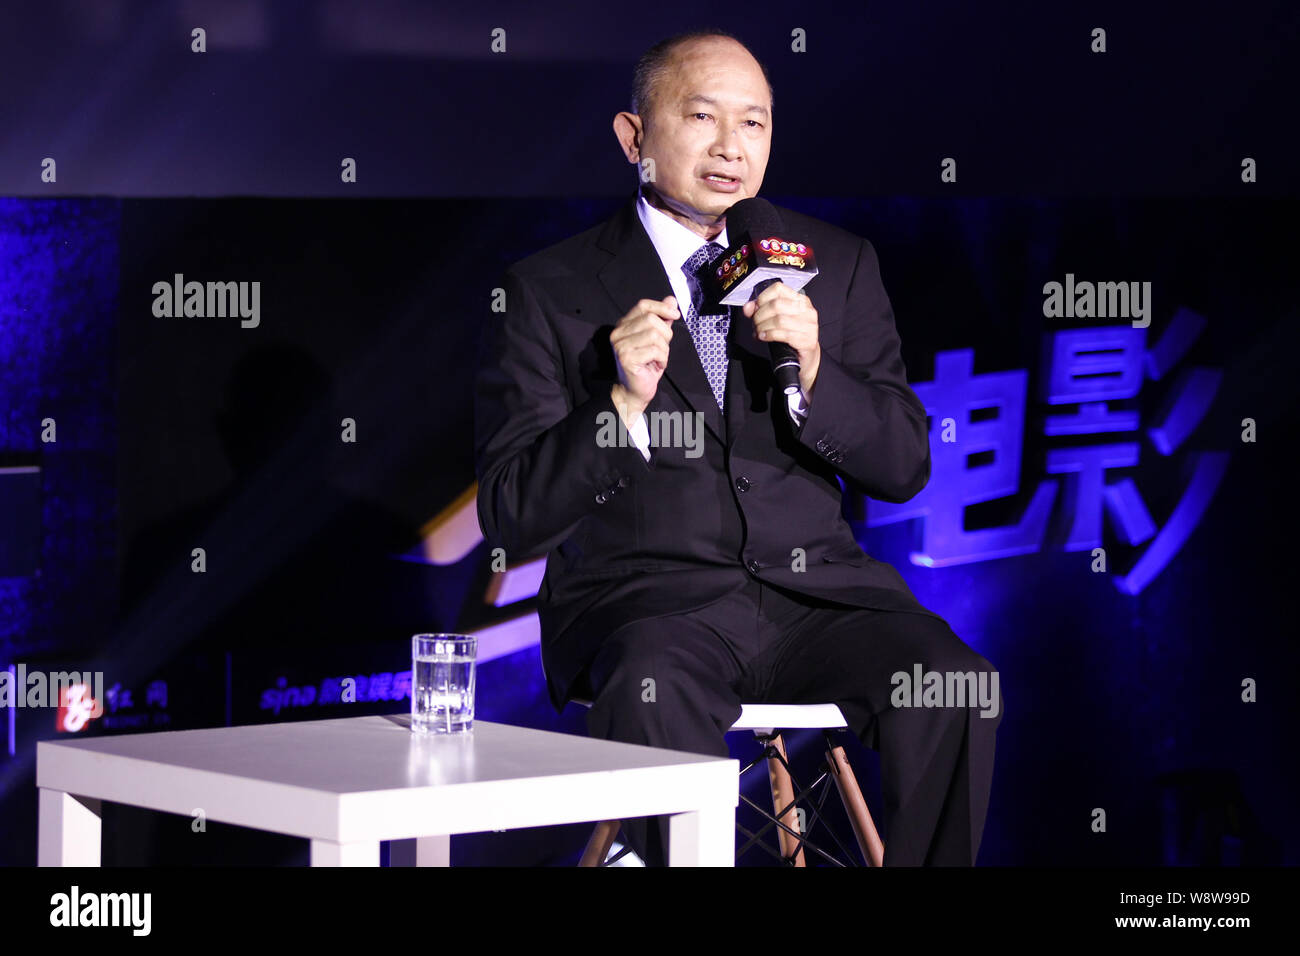 Hong Kong director John Woo speaks at a lecture for Chinese movie project EEC (Entertainment Experience China) in Beijing, China, 11 October 2014. Stock Photo